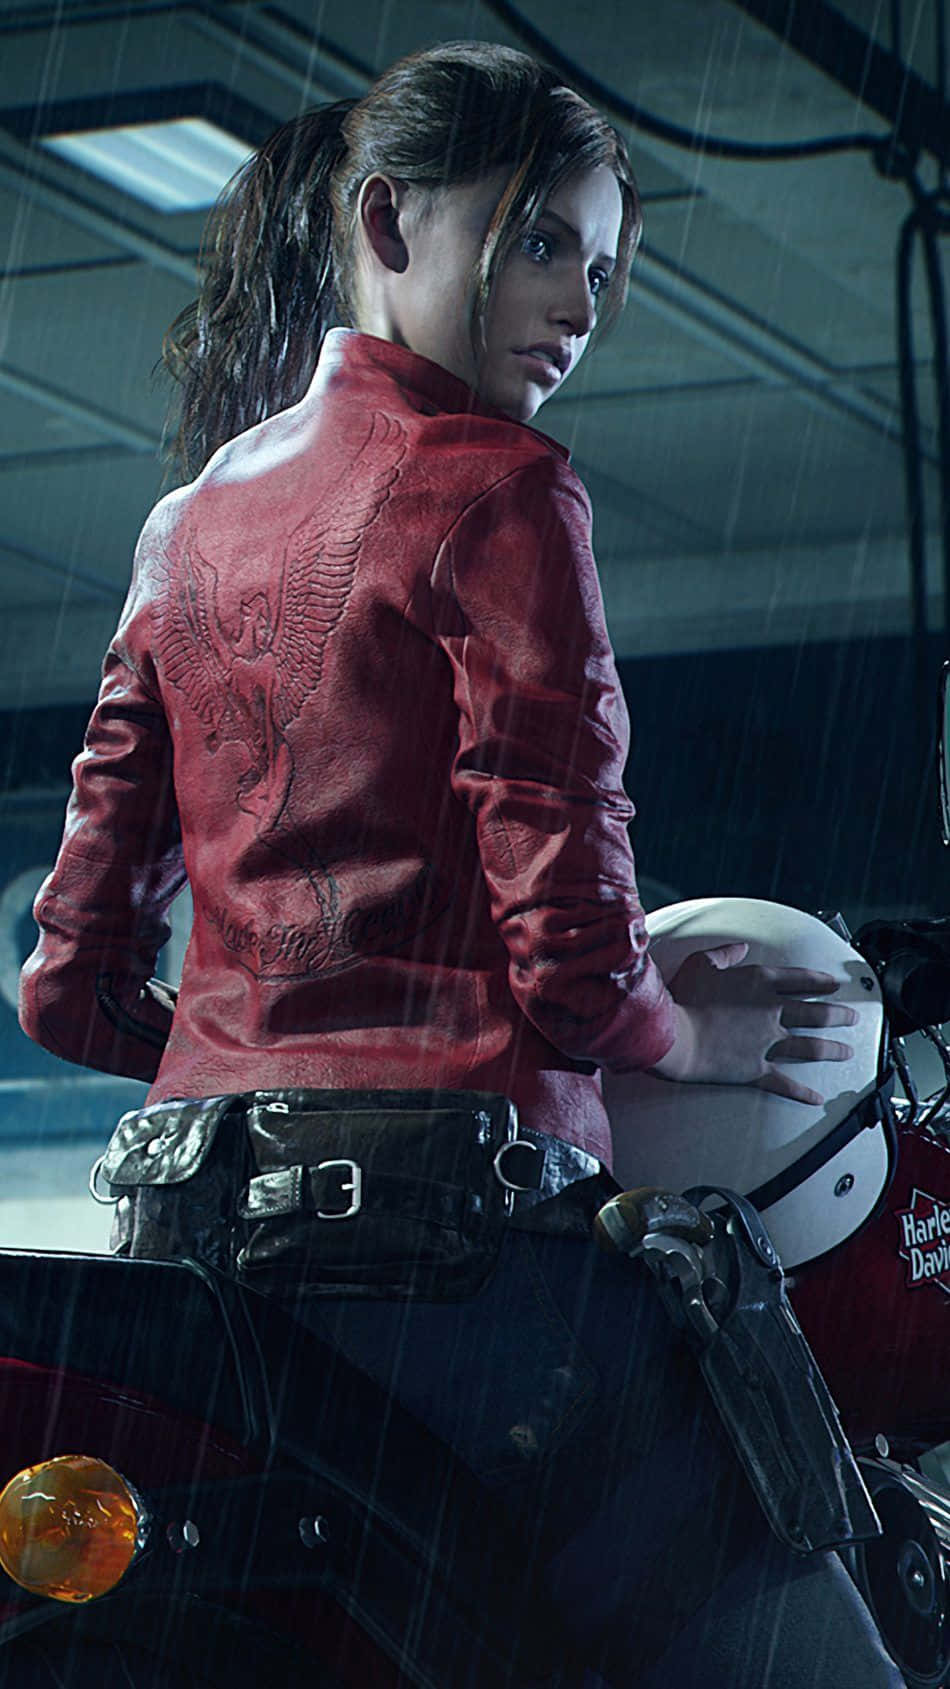 Resident Evil 2 Claire On The Motorcycle Phone Wallpaper